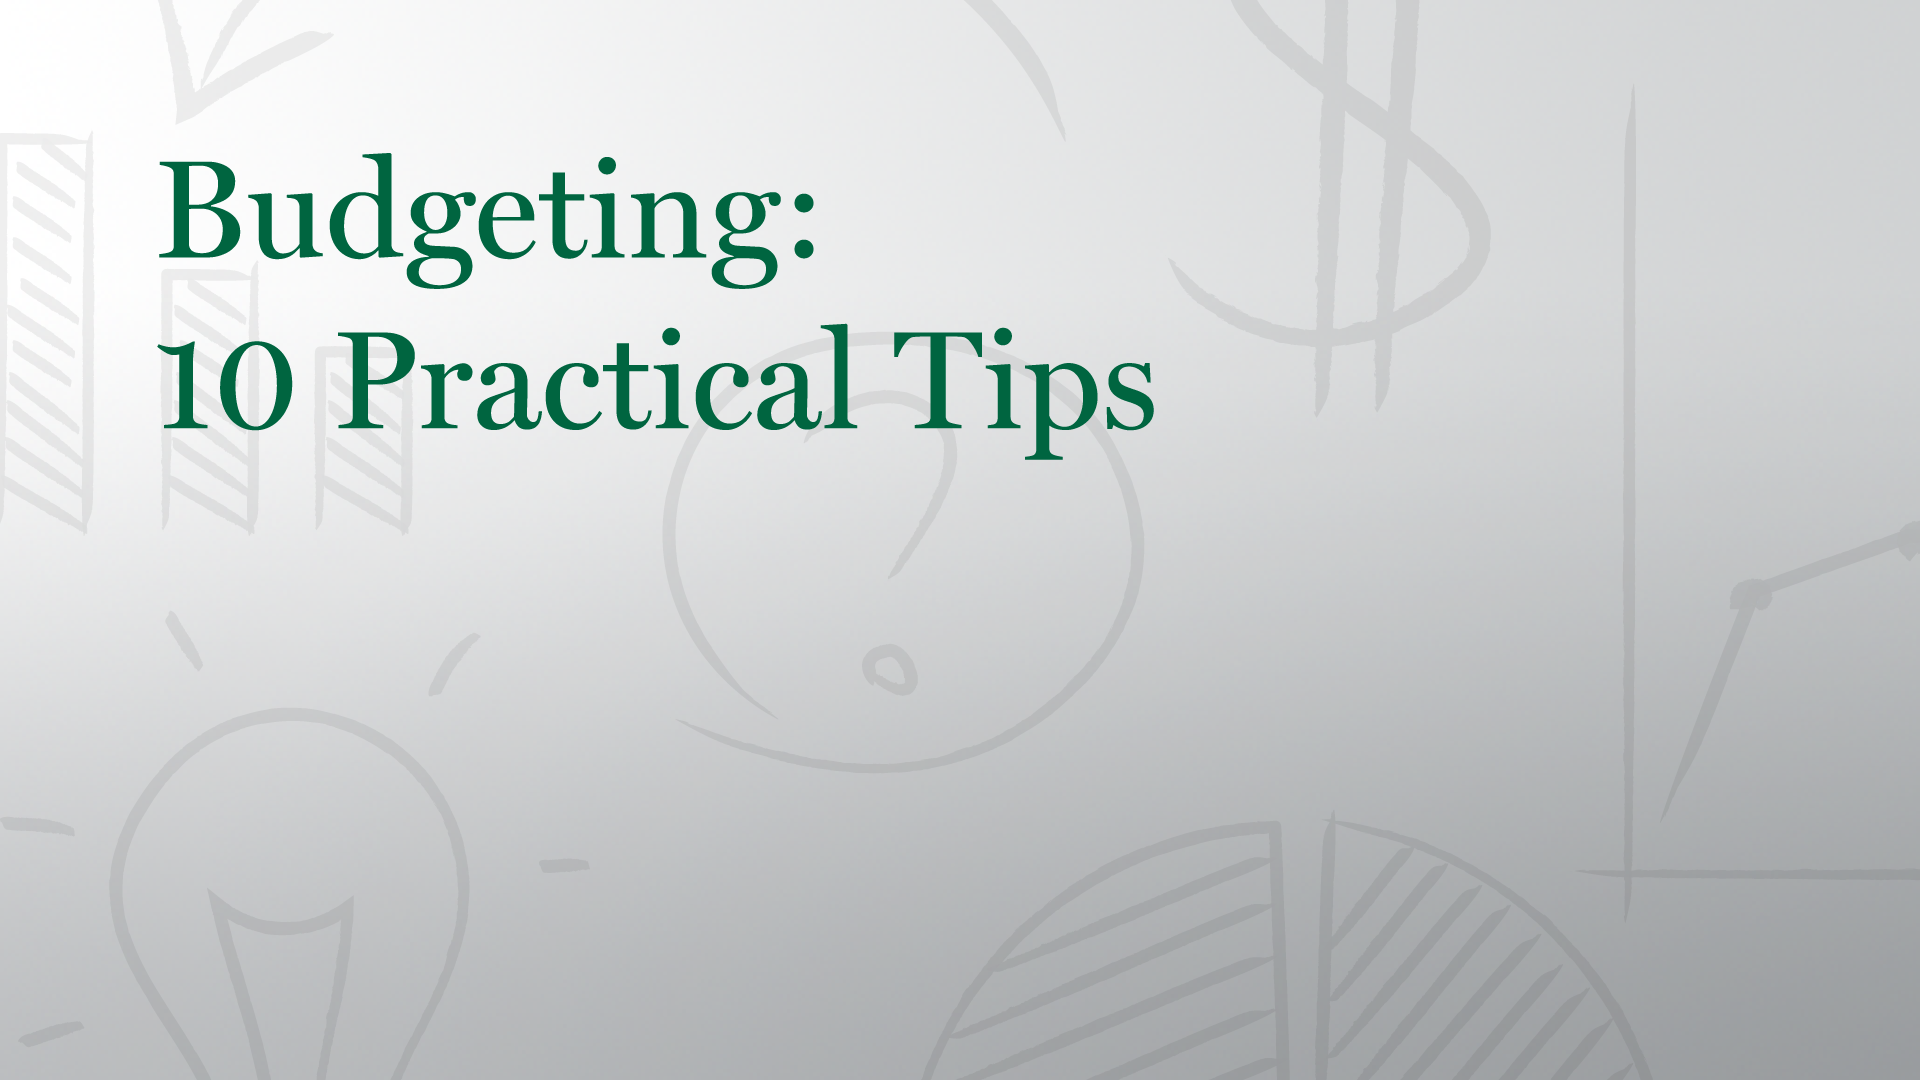 Budgeting: 10 Practical Tips to Help You Get Started